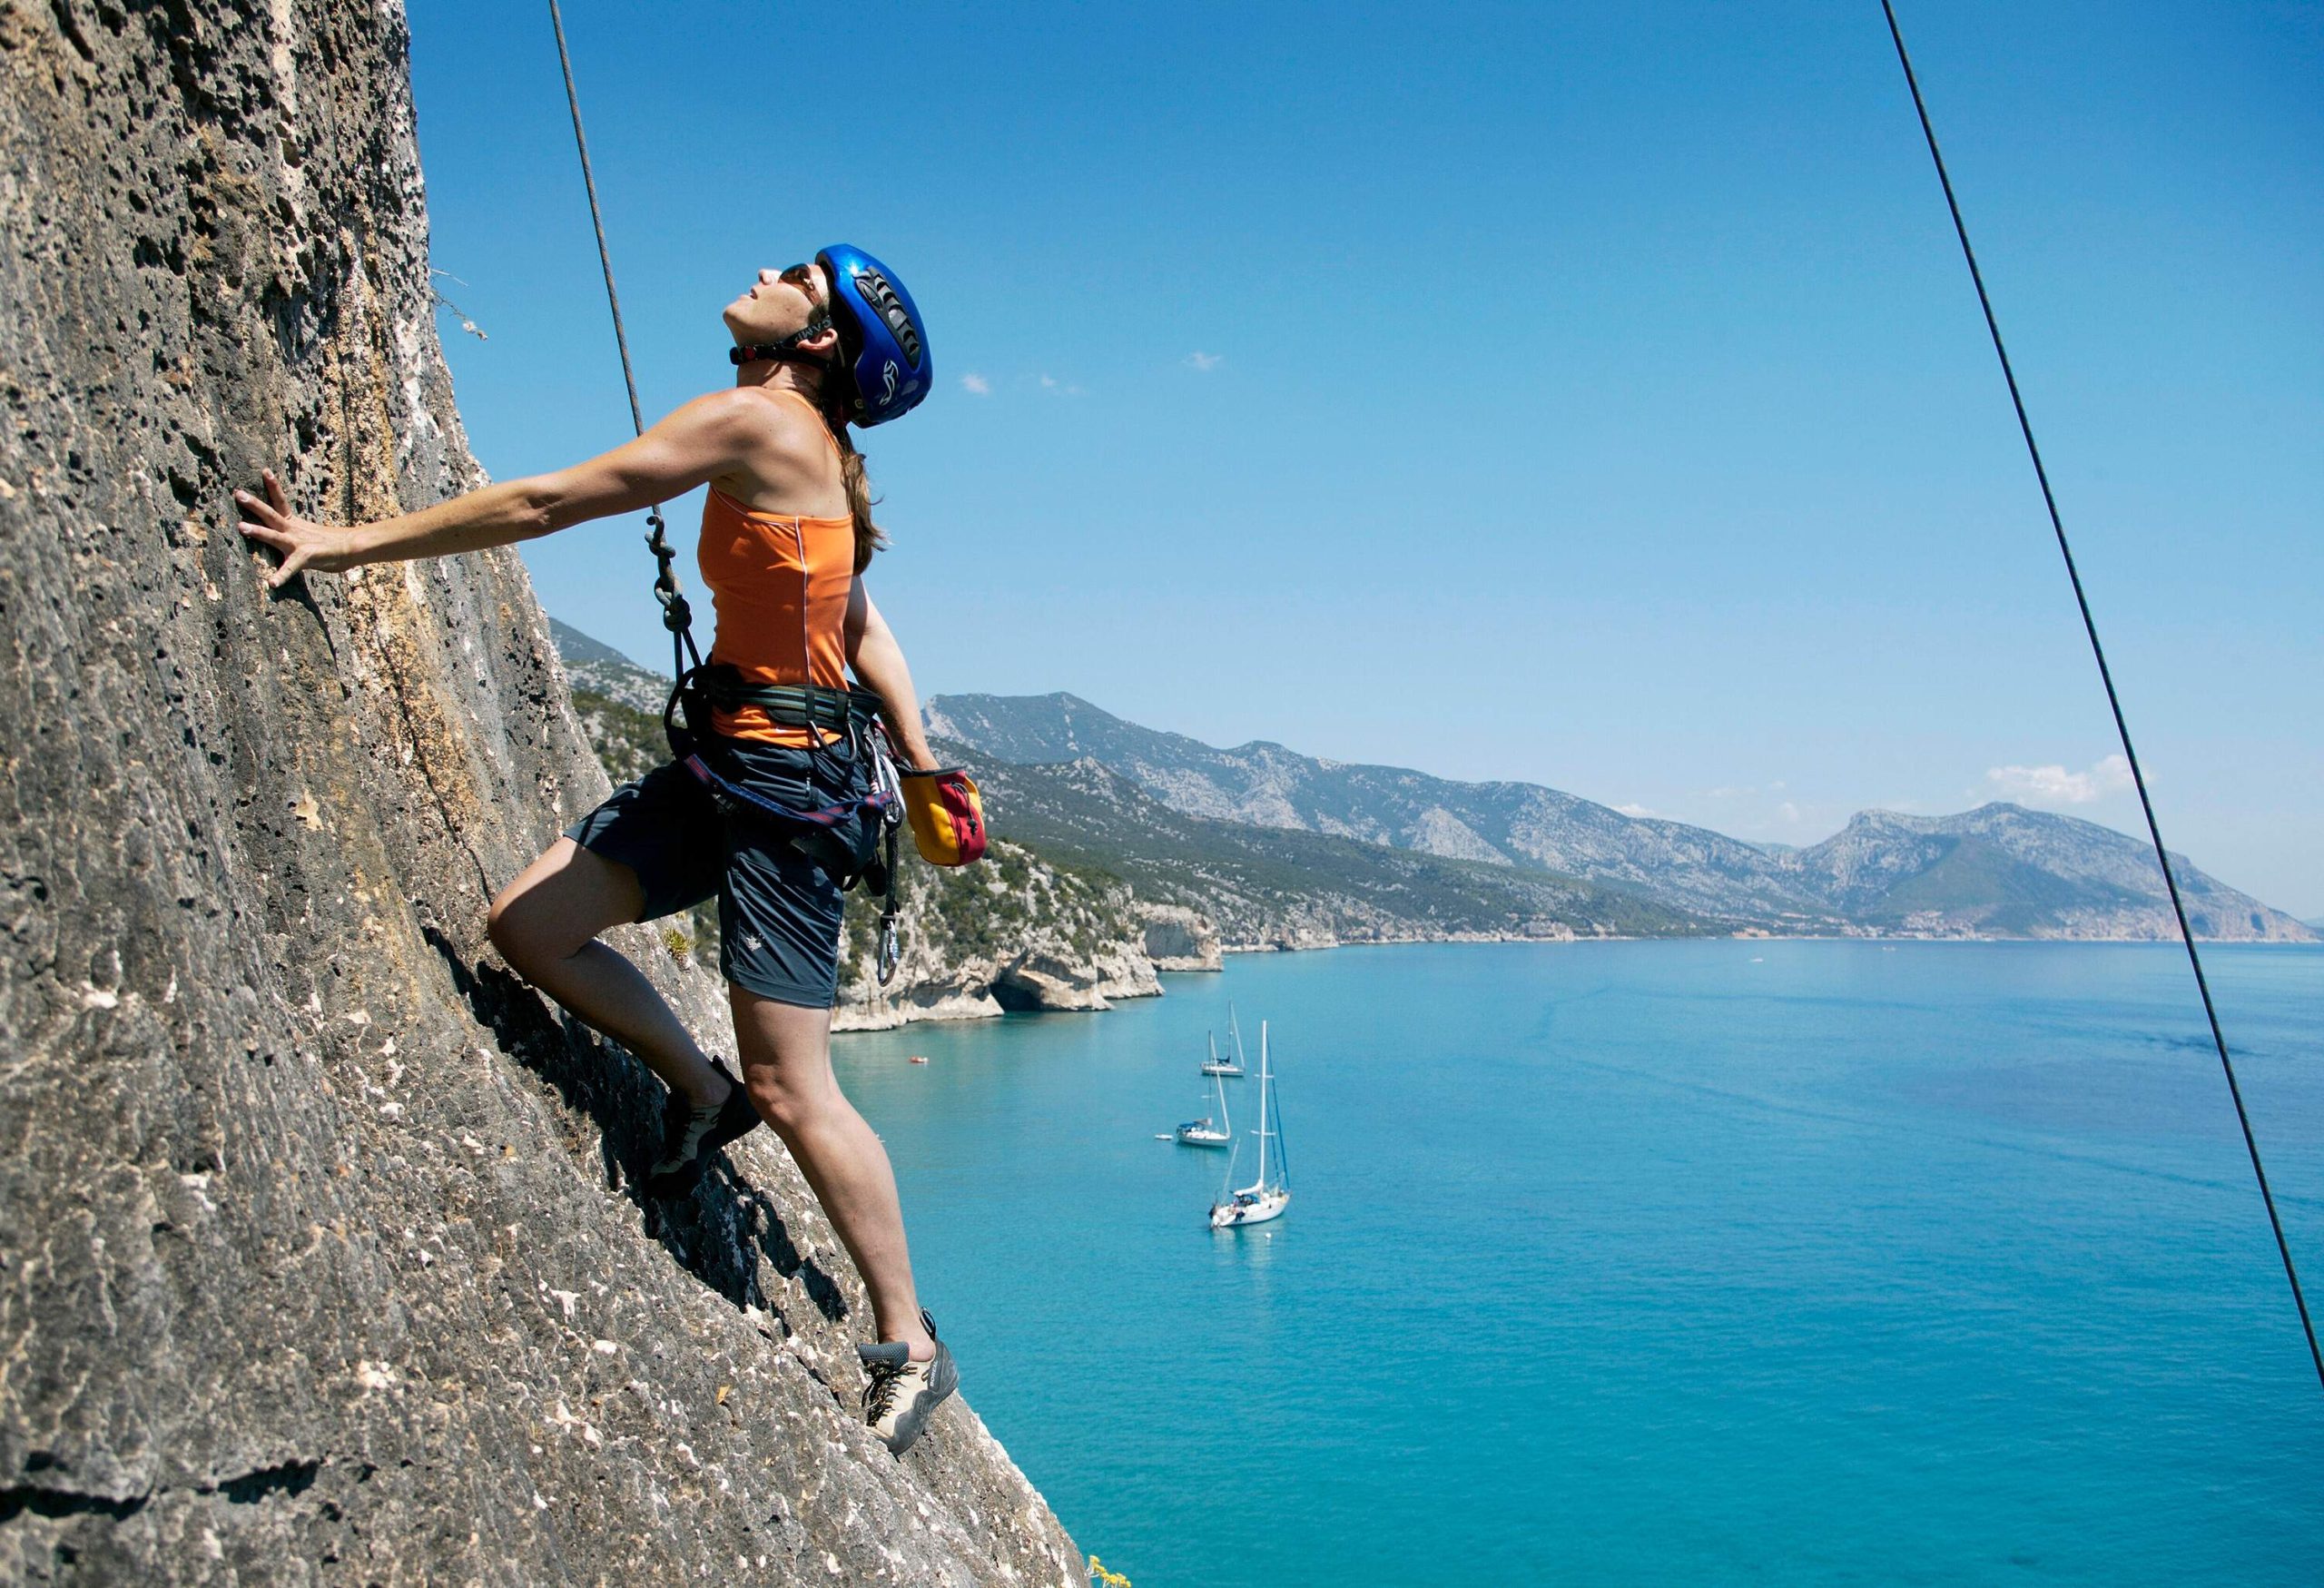 A fearless climber, wearing a helmet and connected to cables, scales a cliff overlooking the awe-inspiring bay below.